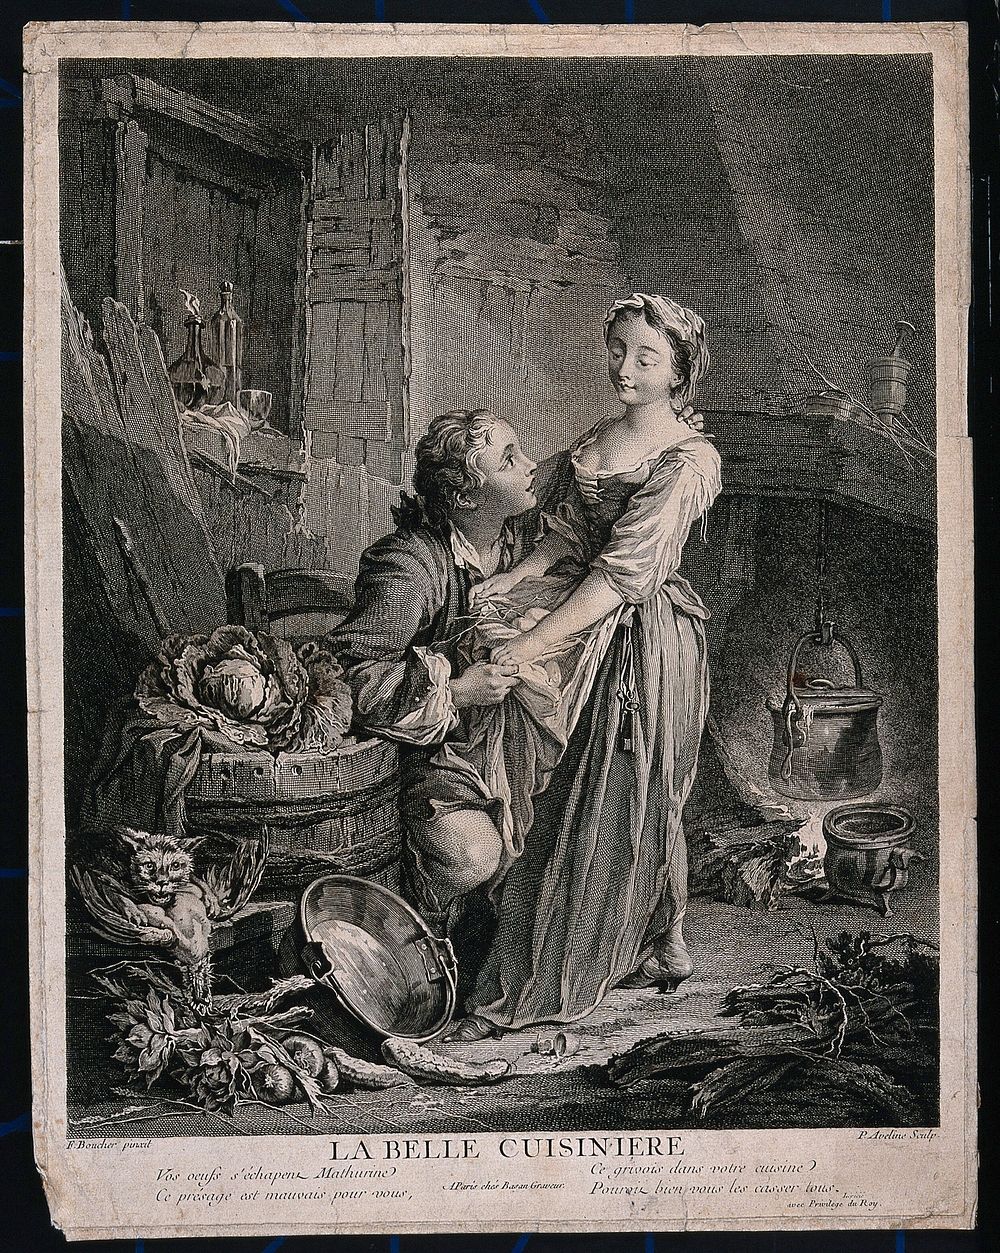 A boy pulls at the hand of a girl who is holding eggs in her apron. Engraving by P. Aveline, ca. 1734, after F. Boucher.